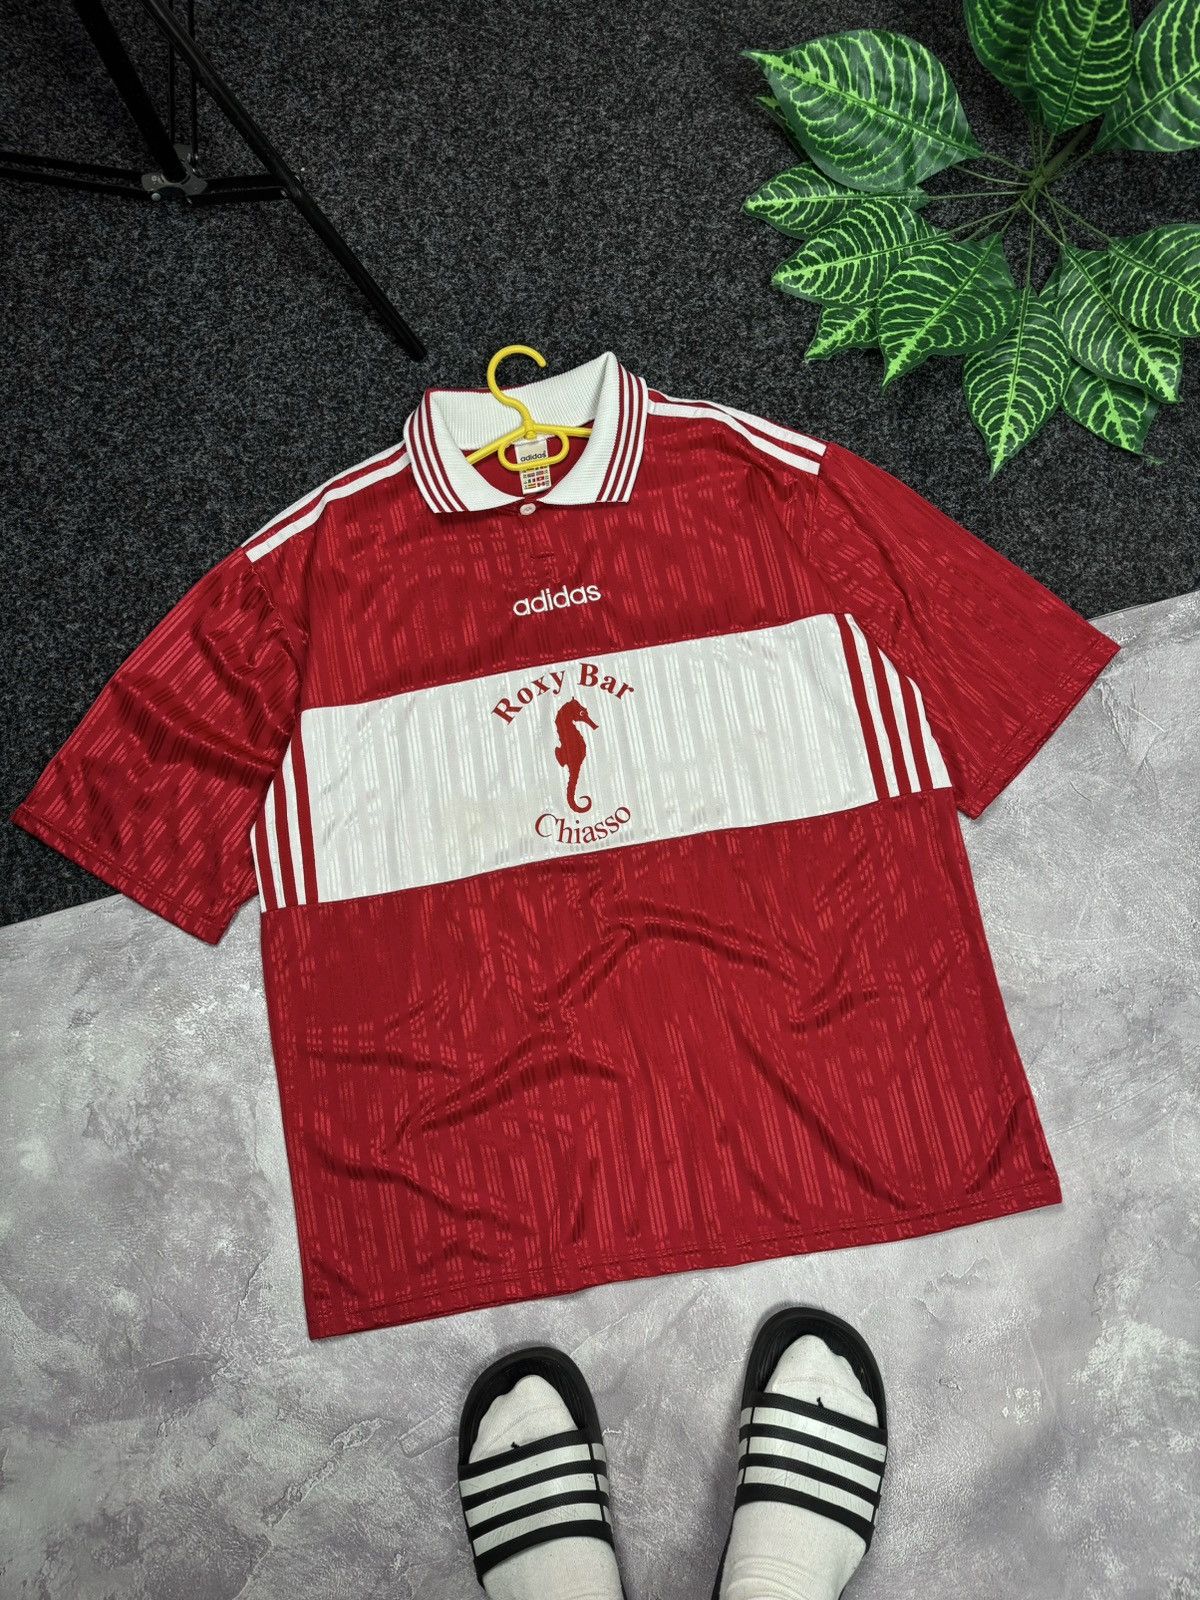 Pre-owned Adidas X Vintage Adidas Jersey Roxy Bar Chiasso Number 12 Size Xxl In Red